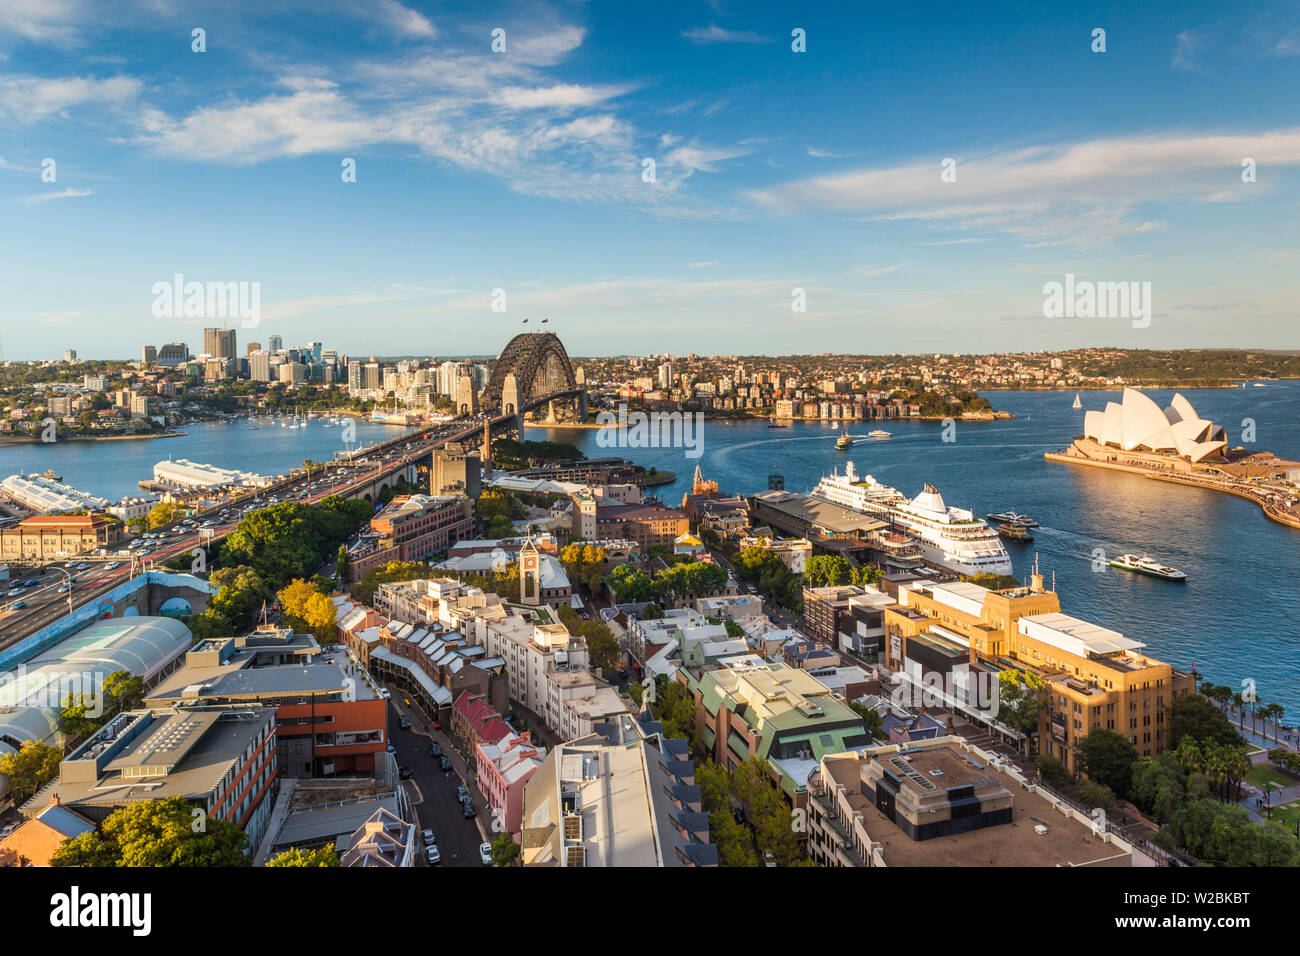 Australia, New South Wales, NSW, Sydney, The Rocks area, Sydney Harbour Bridge and Sydney Opera House, elevated view, late afternoon Stock Photo